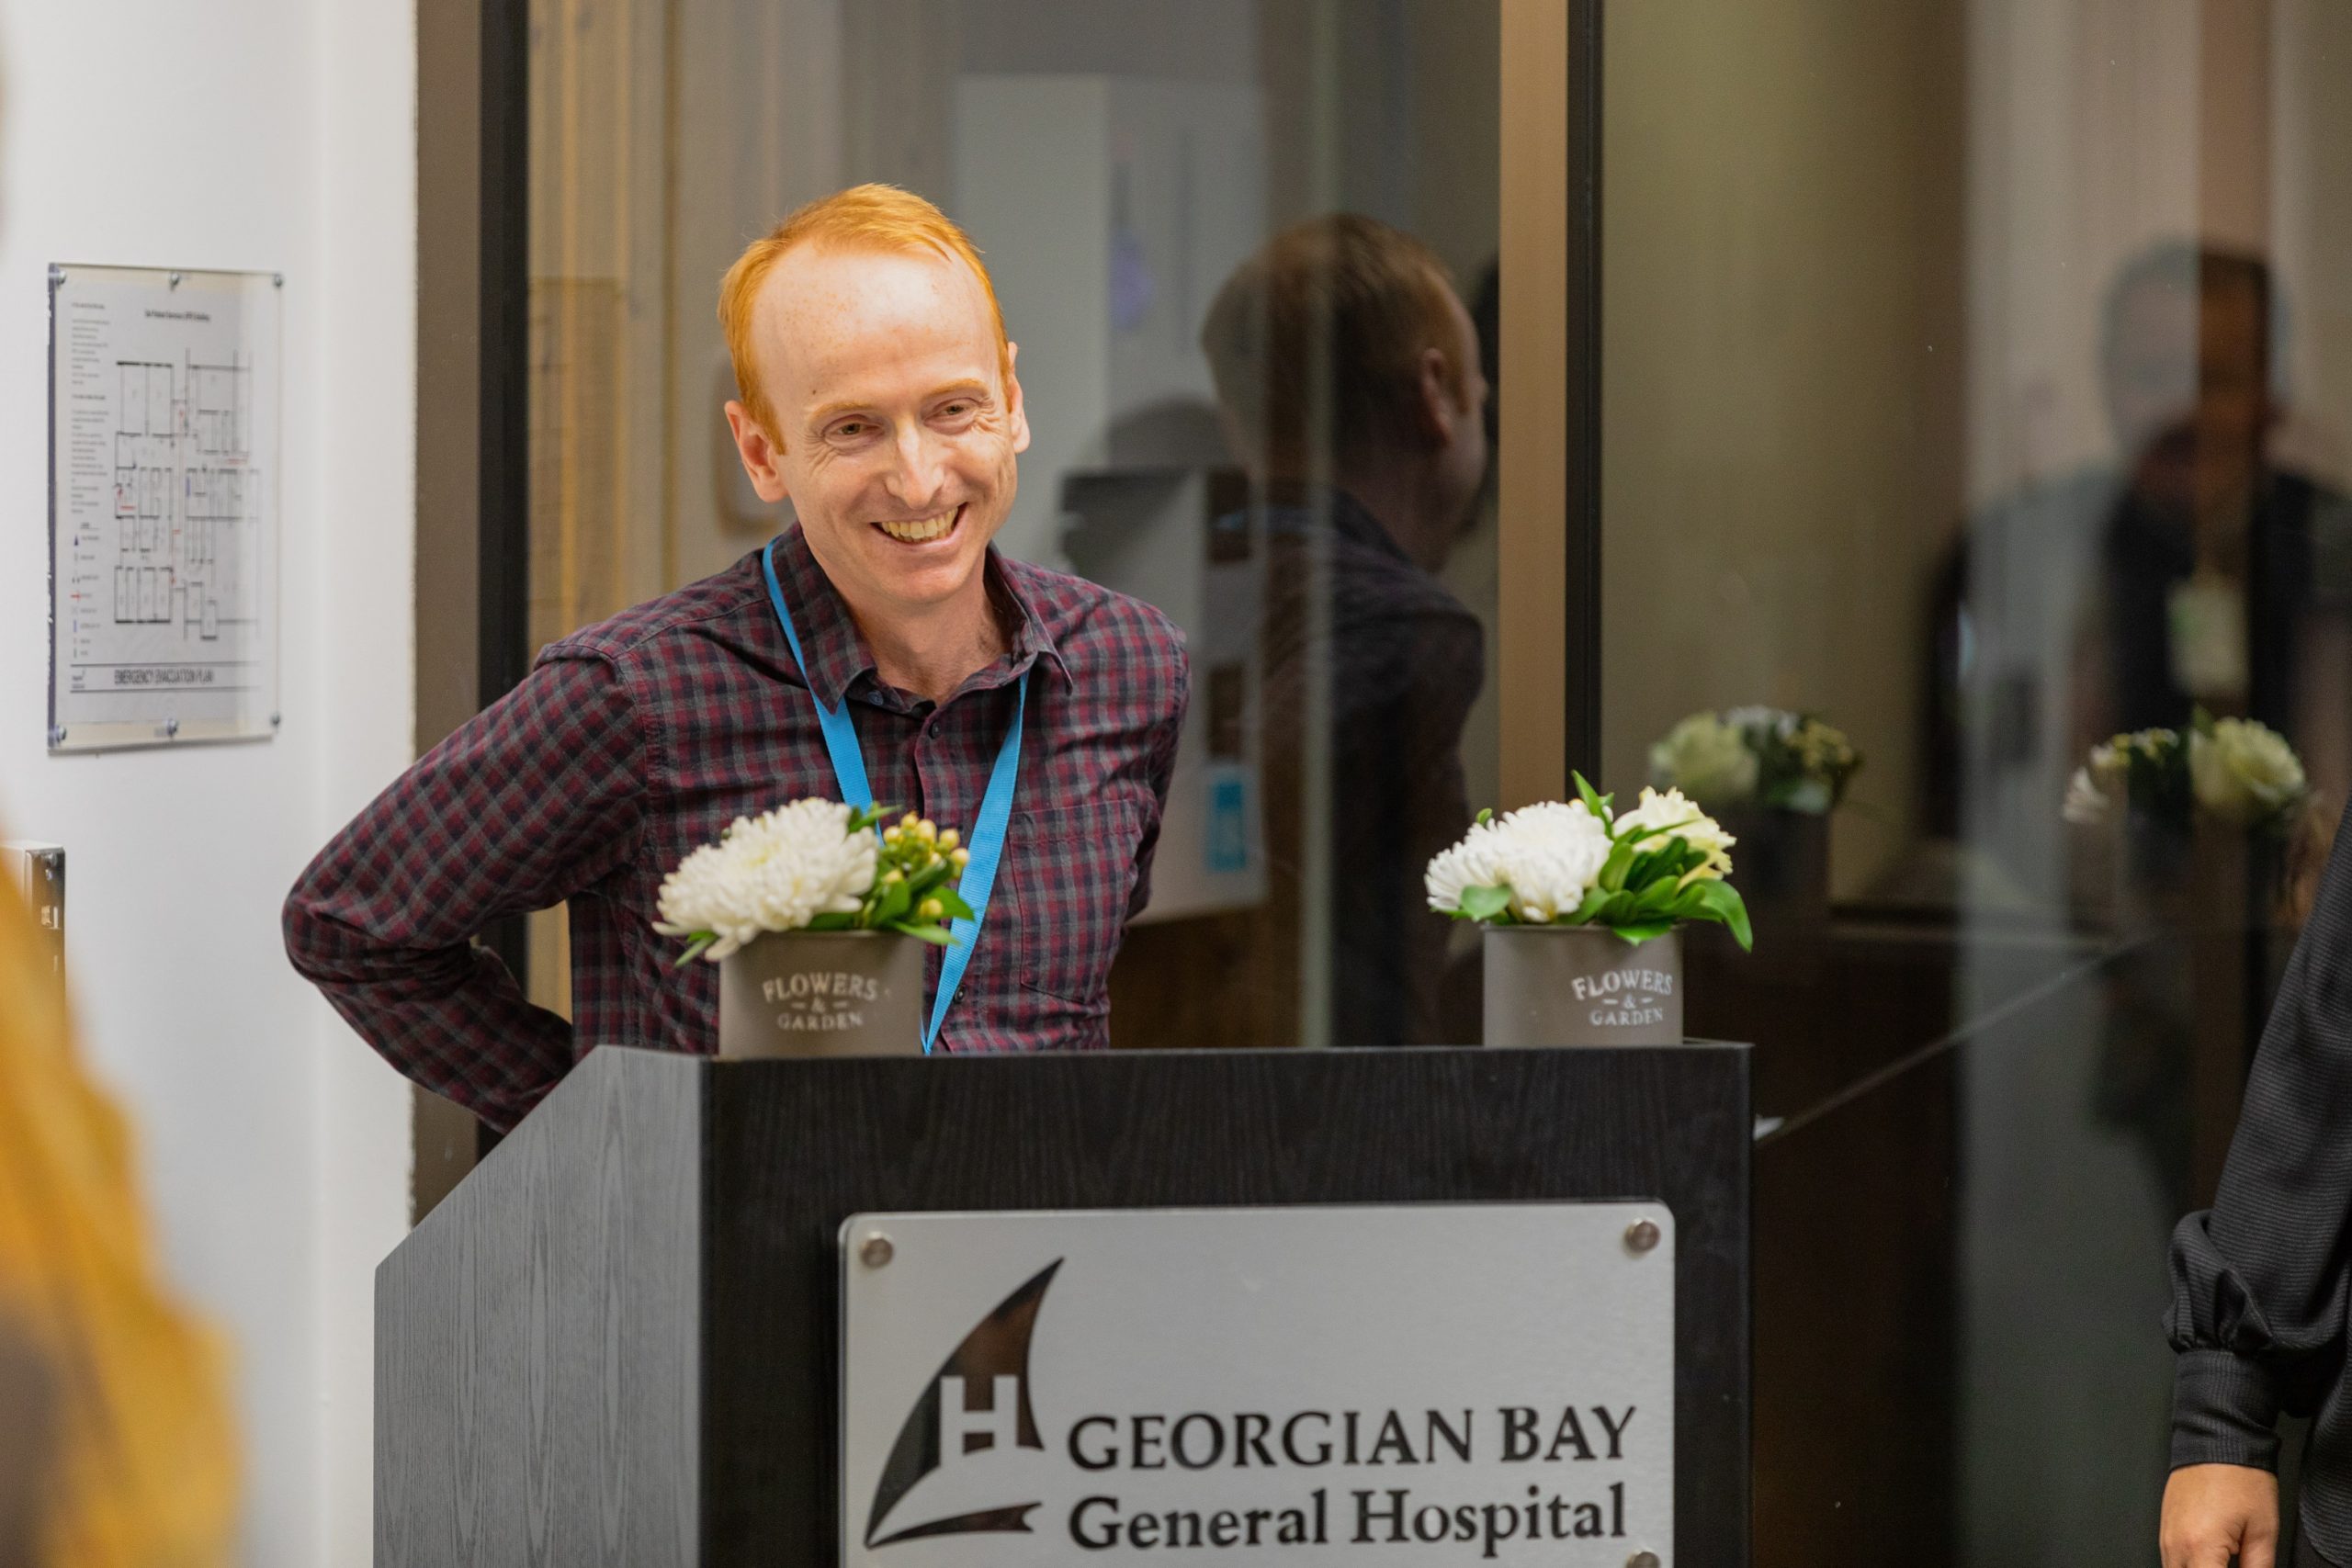 A man with receding red hair wearing a plaid shirt stands at a podium that has Georgian Bay General Hospital written on it